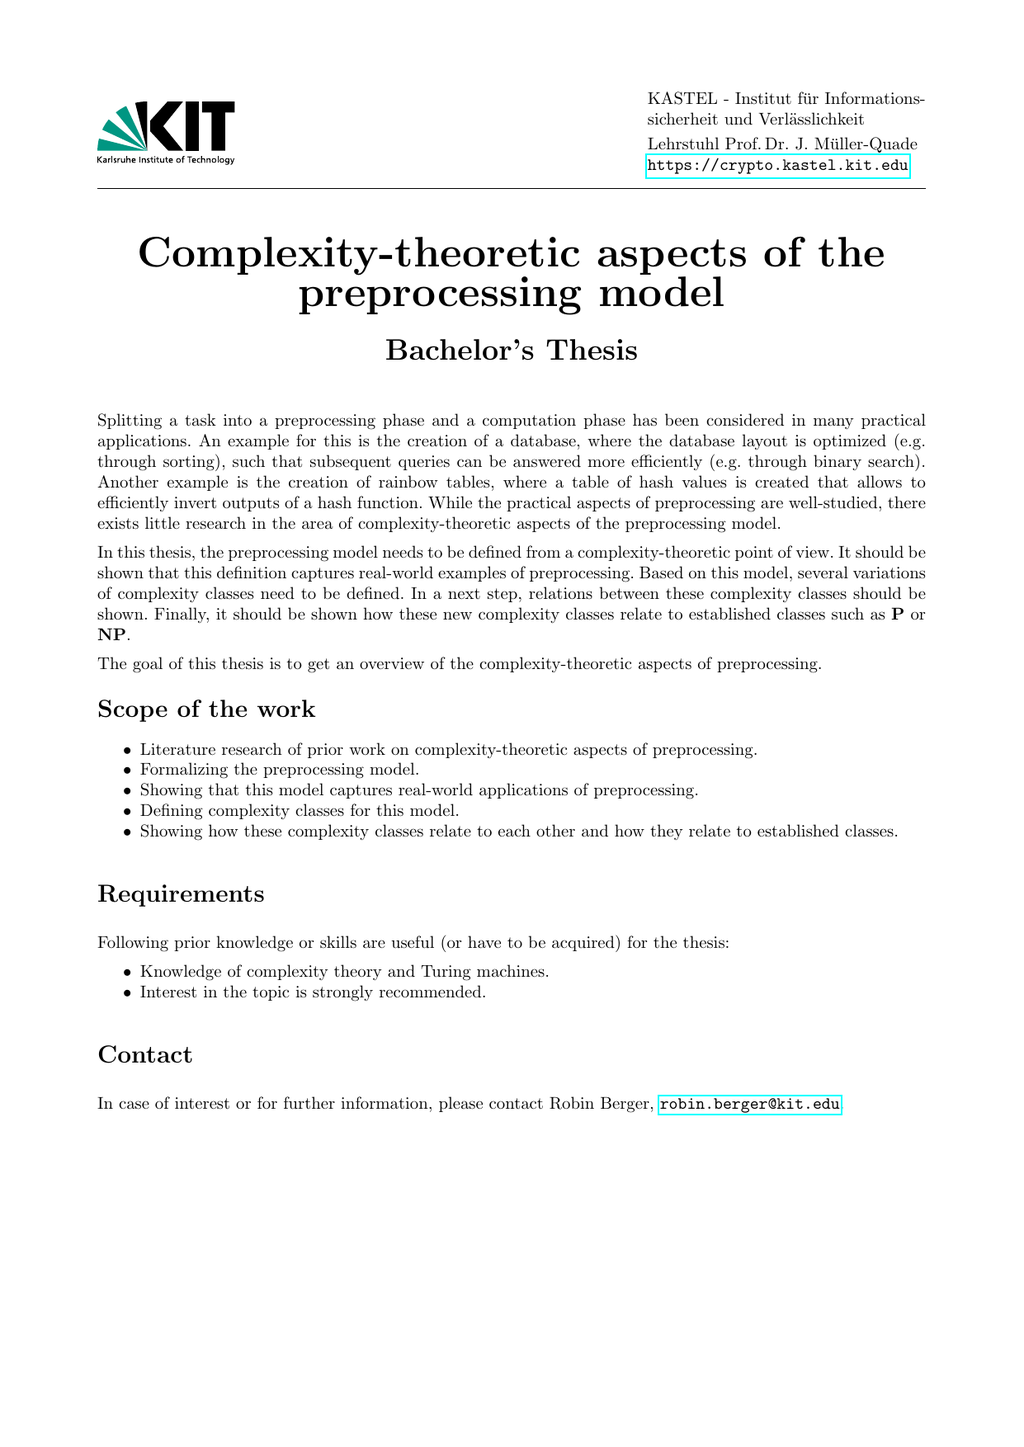 [BA] Complexity-theoretic aspects of the preprocessing model